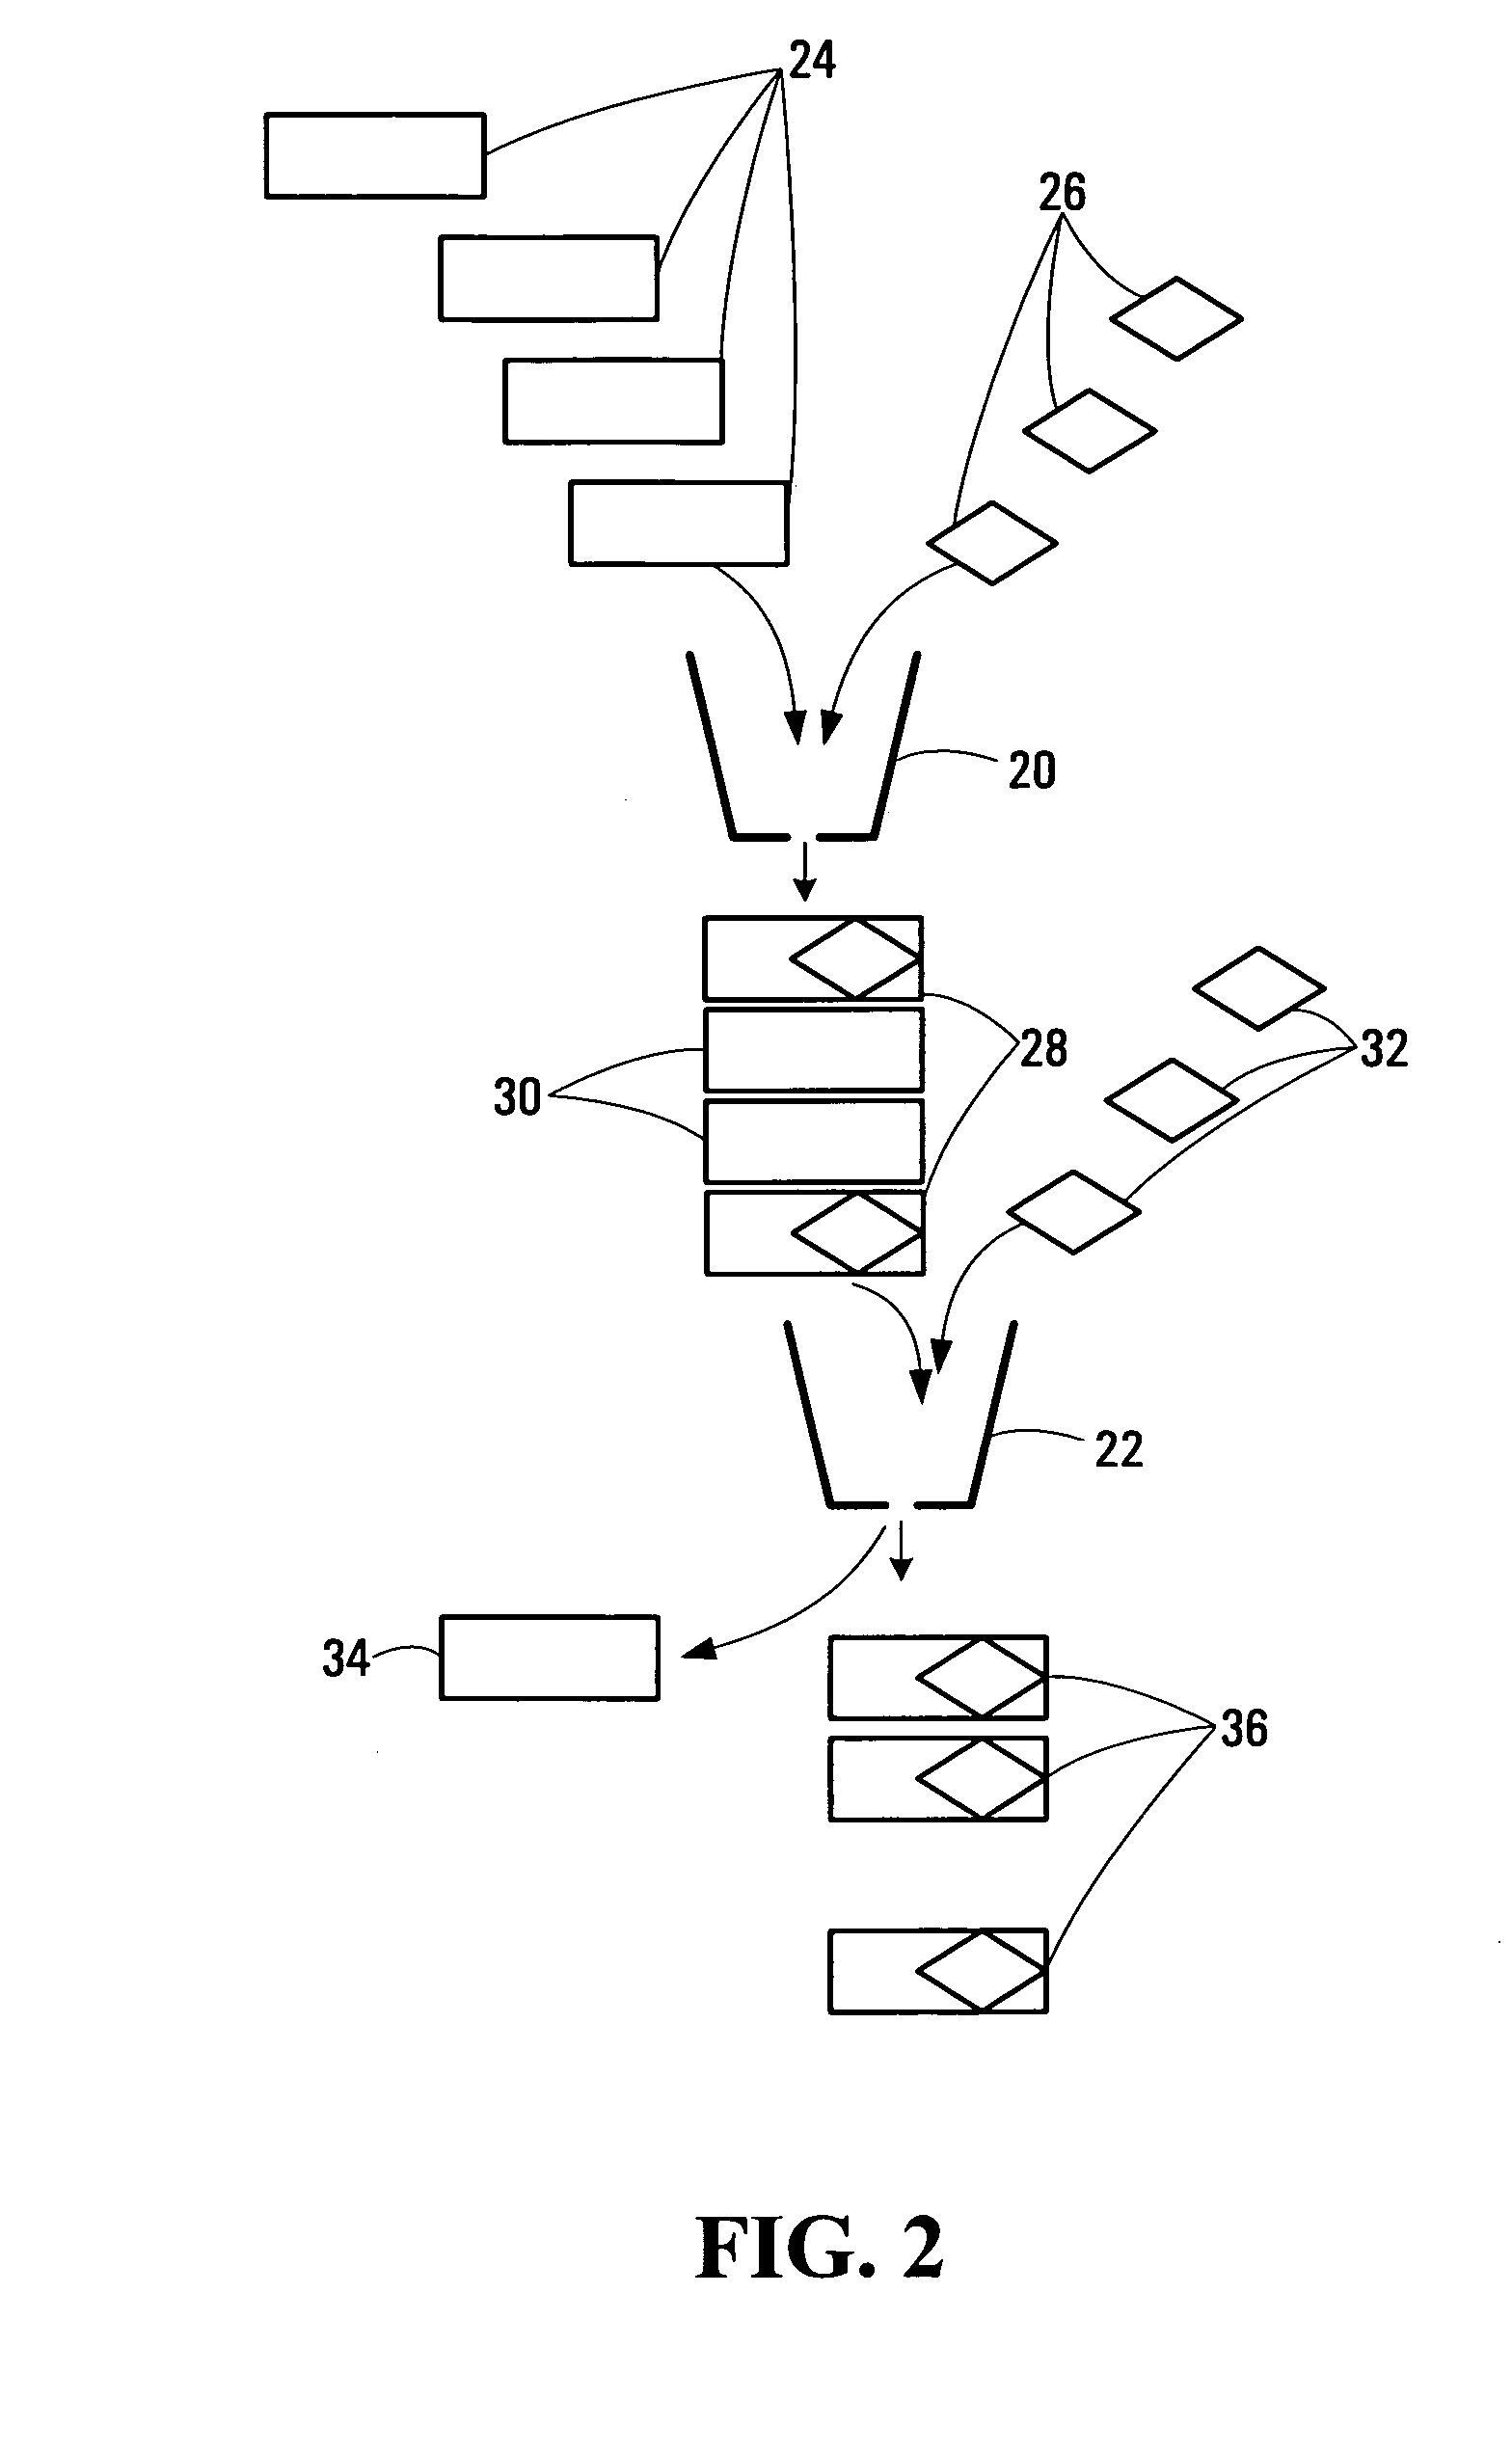 Communication traffic policing apparatus and methods